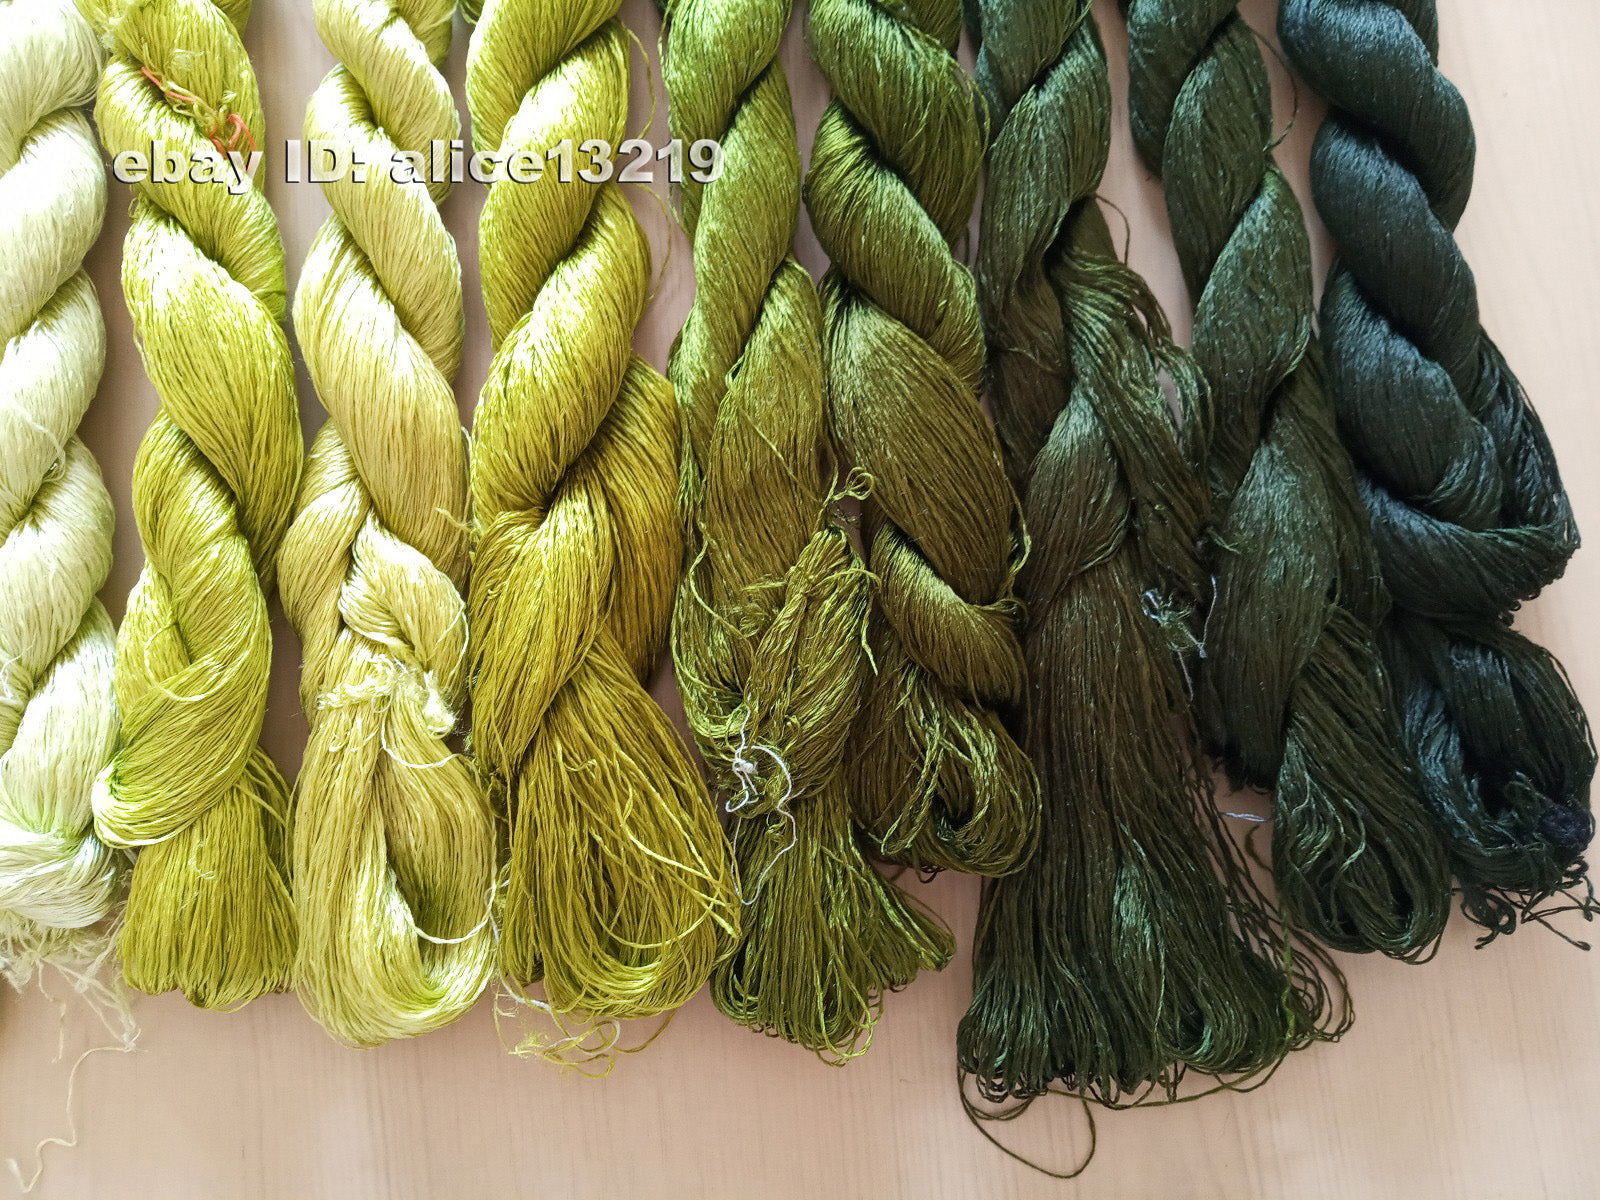 10bundles 100%real mulberry silk,hand-dyed embroidery silk floss/thread N44